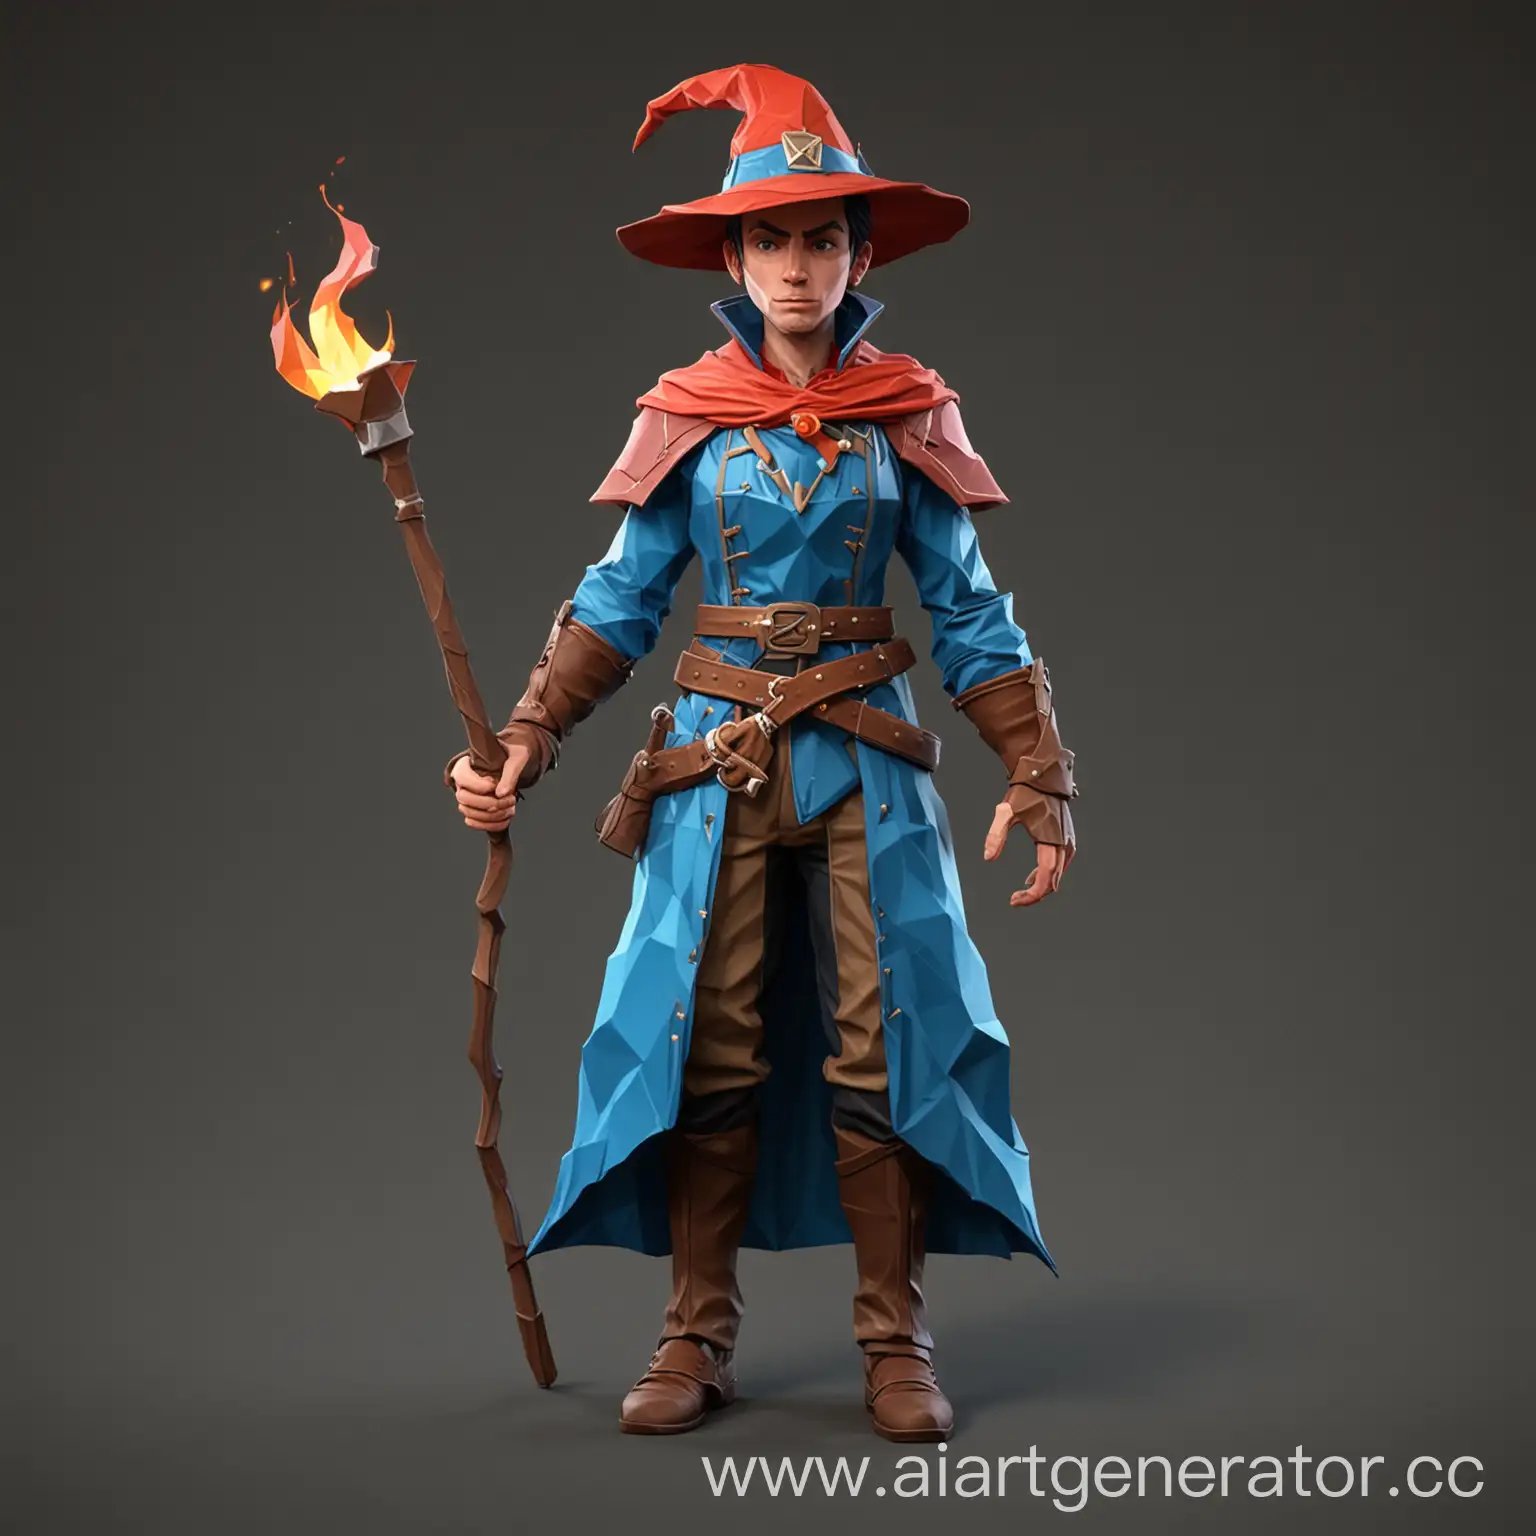 Minimalist-LowPoly-Model-Mage-Casting-Enchantment-Spell